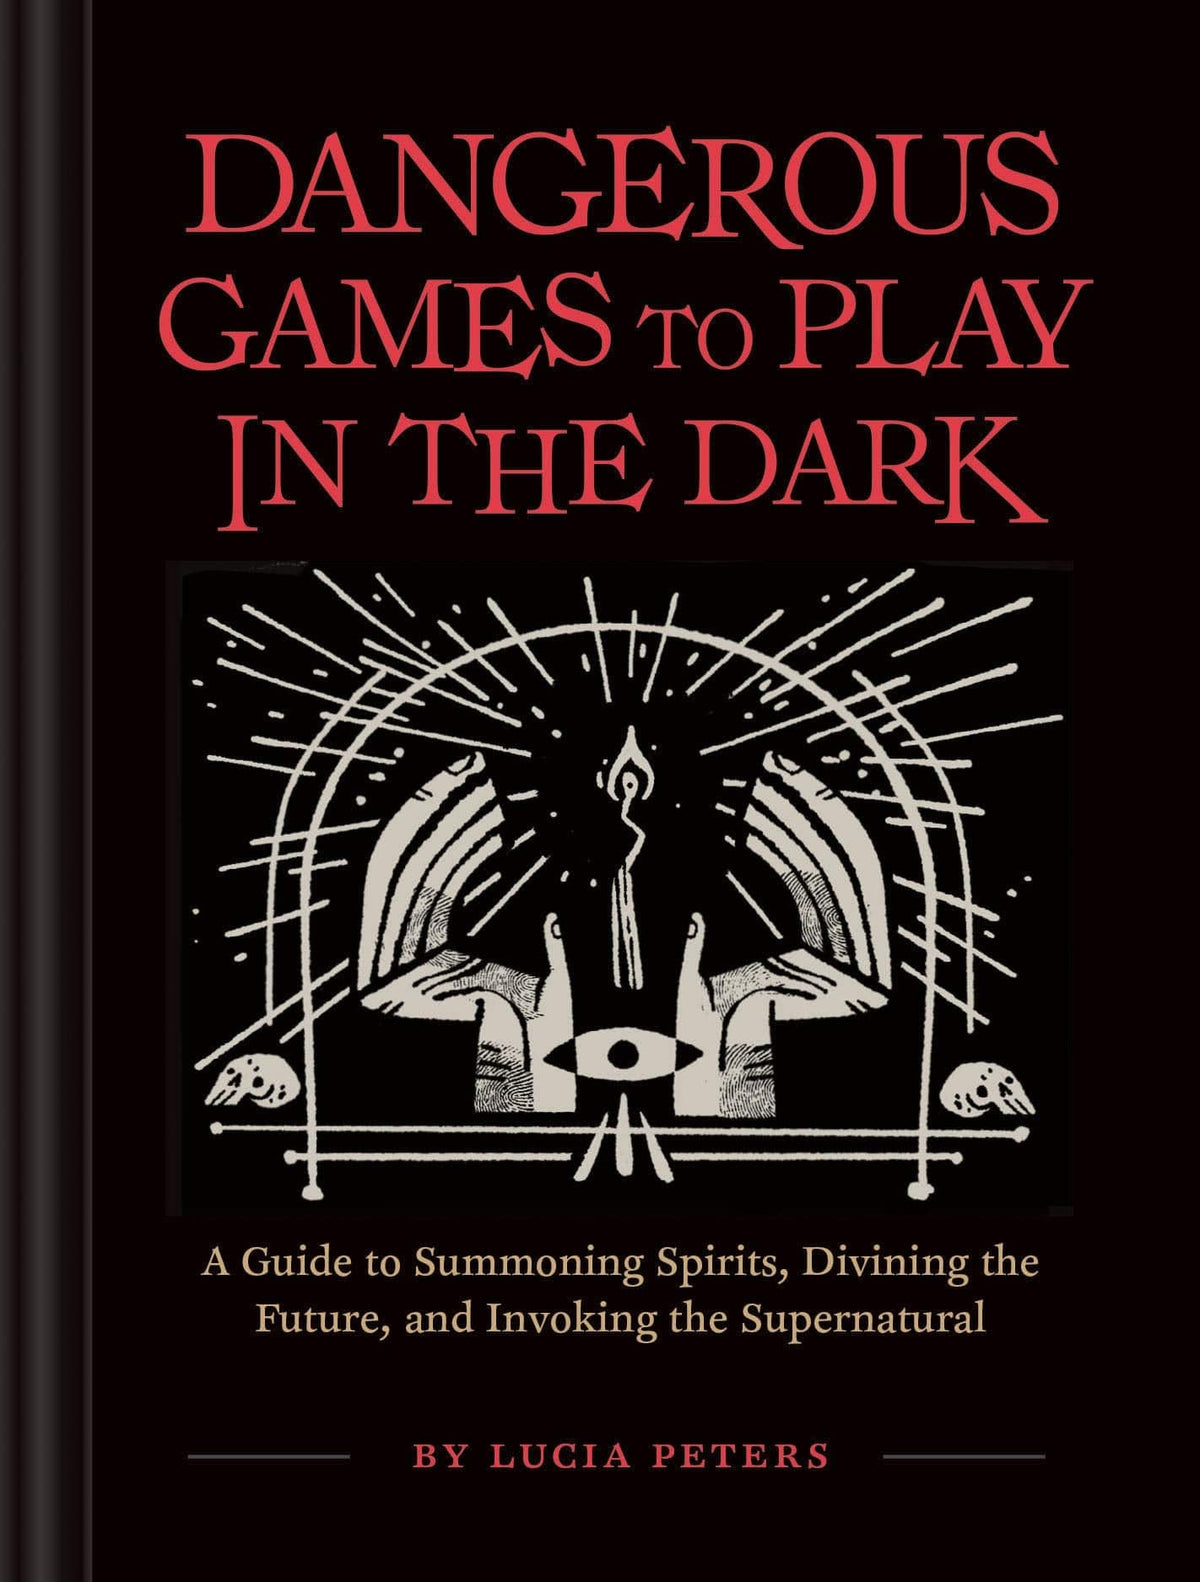 Dangerous Games to Play in the Dark: Guide to Summoning Spirits, Divining the Future... HC - Third Eye